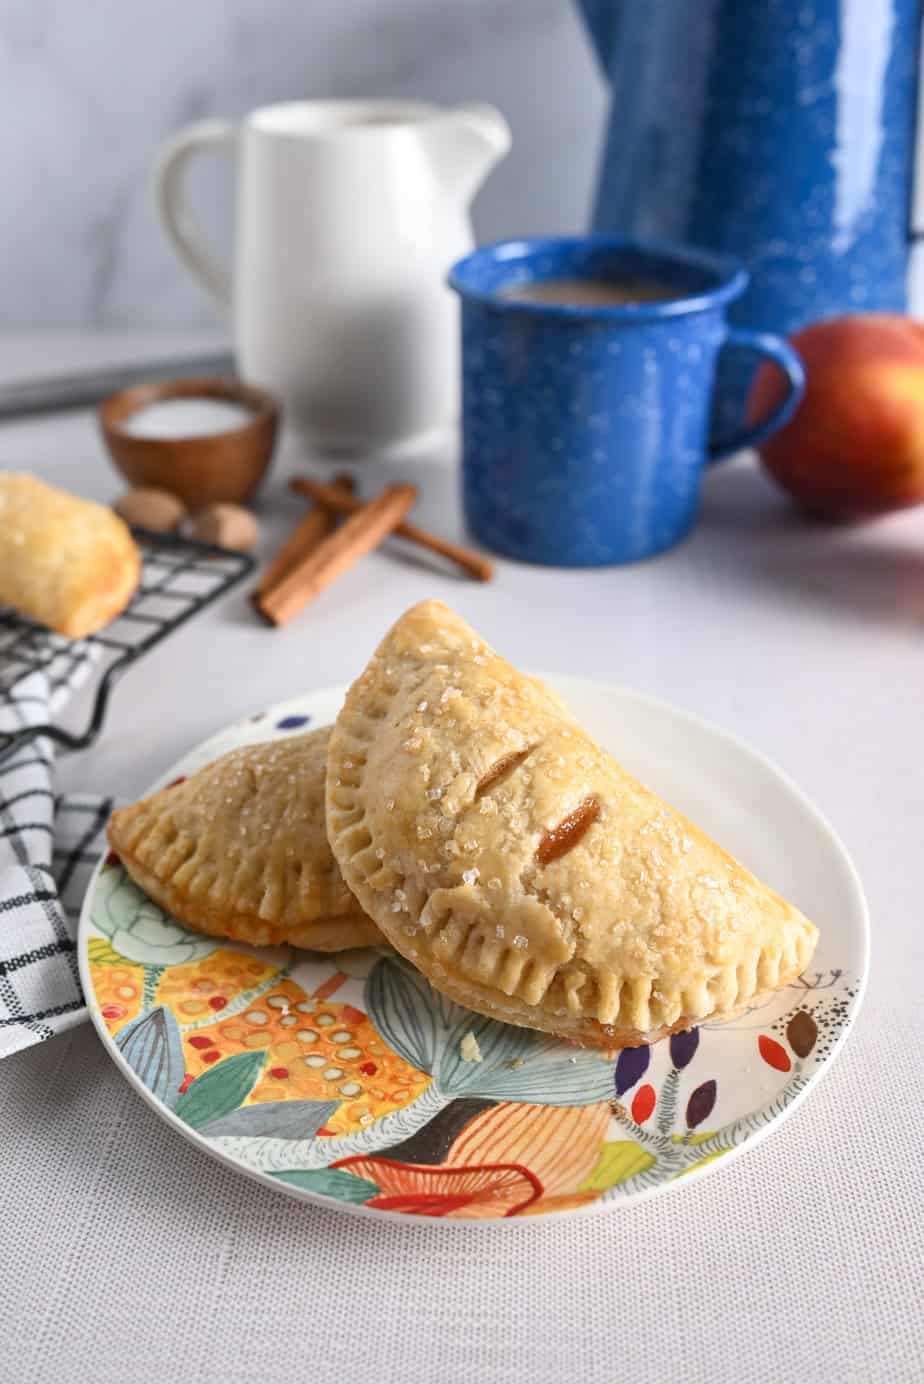 Two peach hand pies perched on a colorful plate.